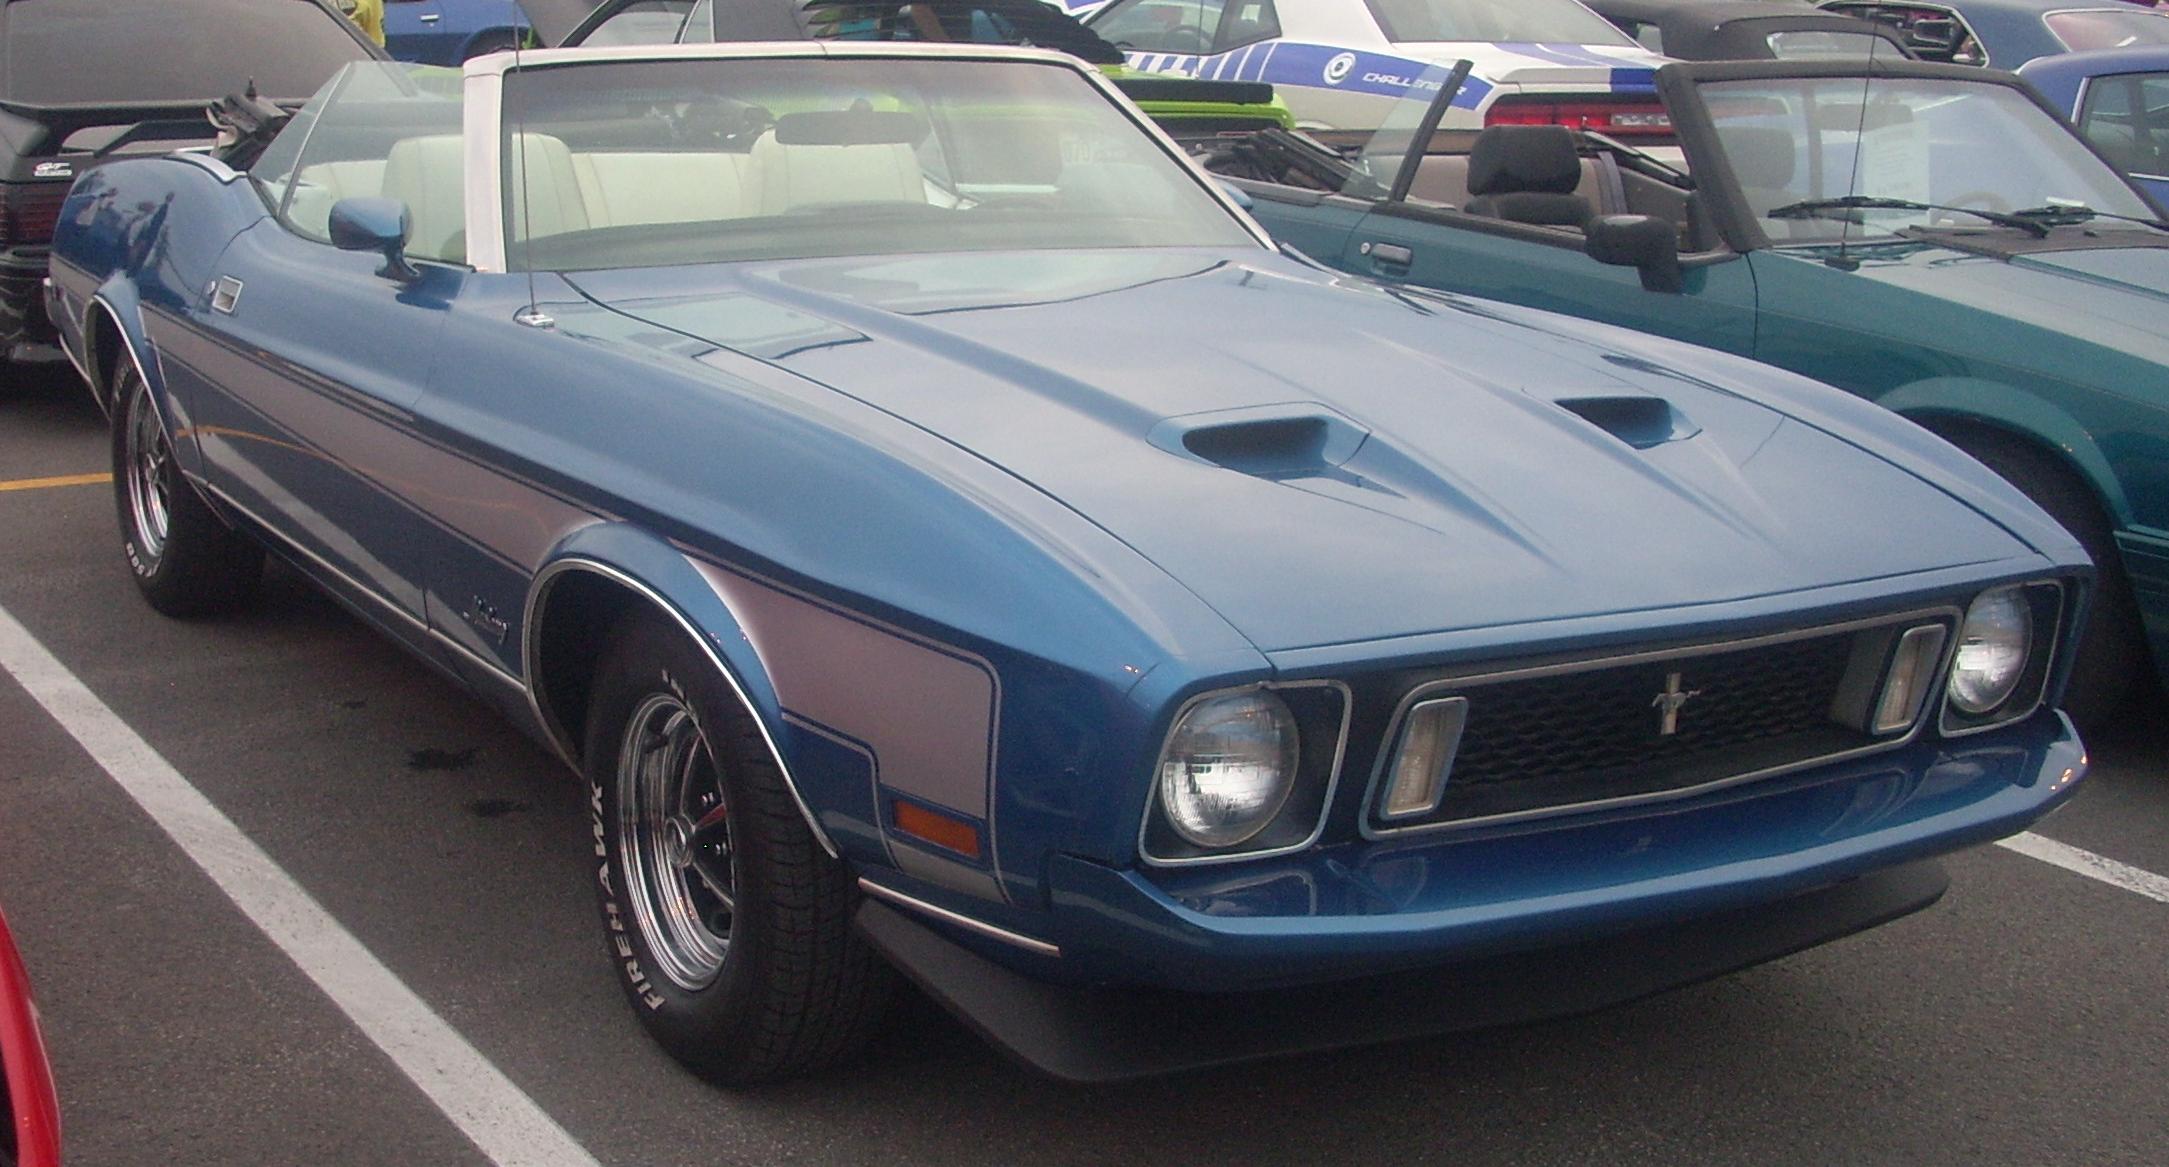 Ford Mustang Mach 1 convertible